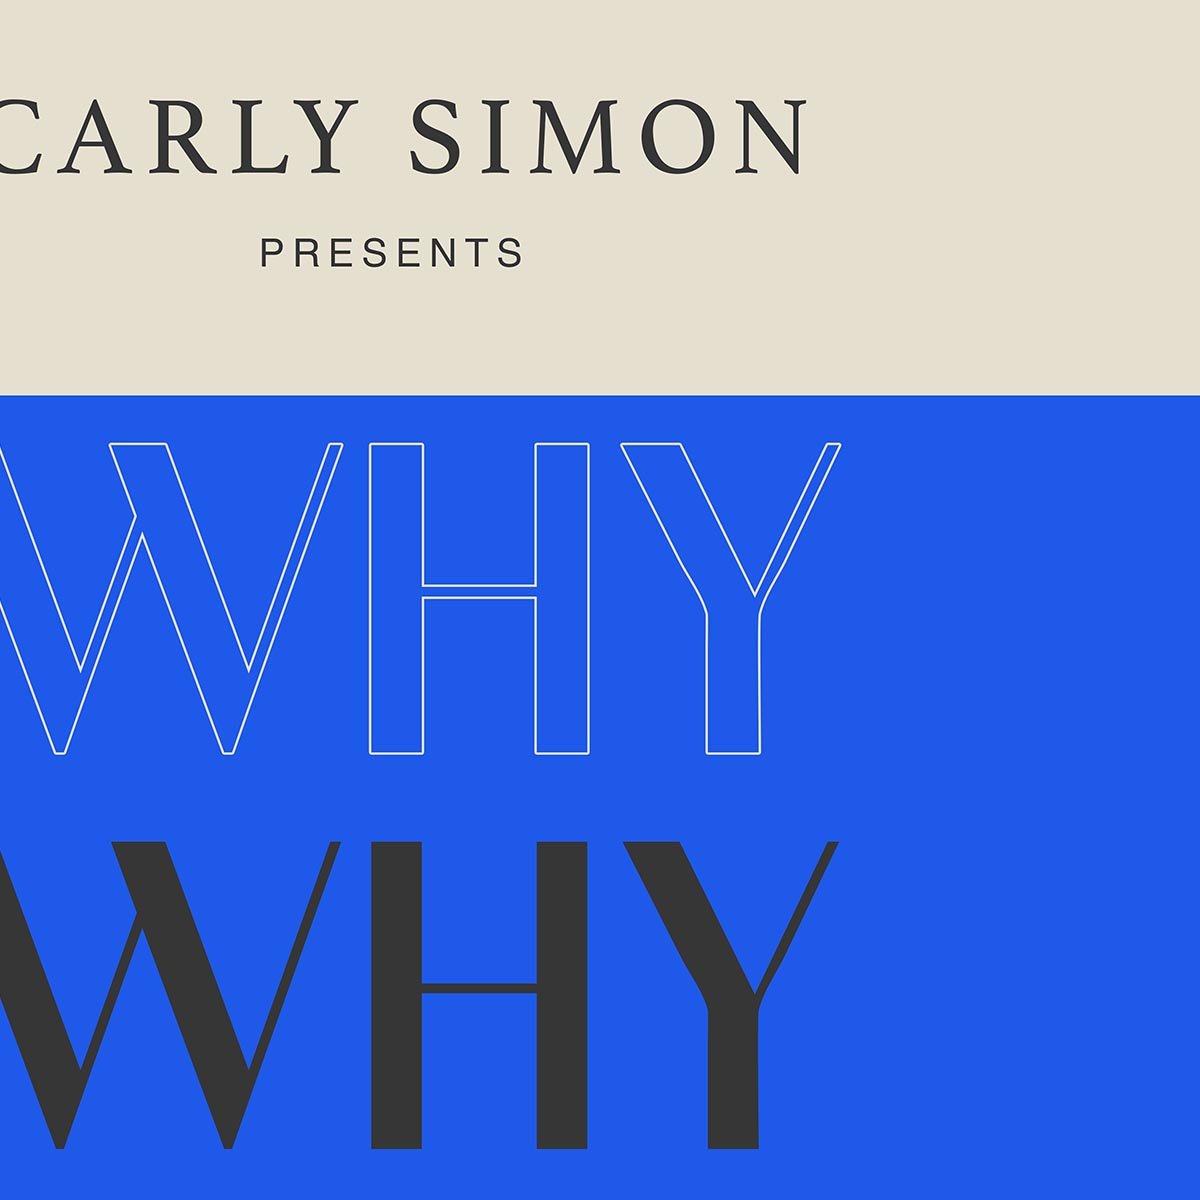 Why by Carly Simons